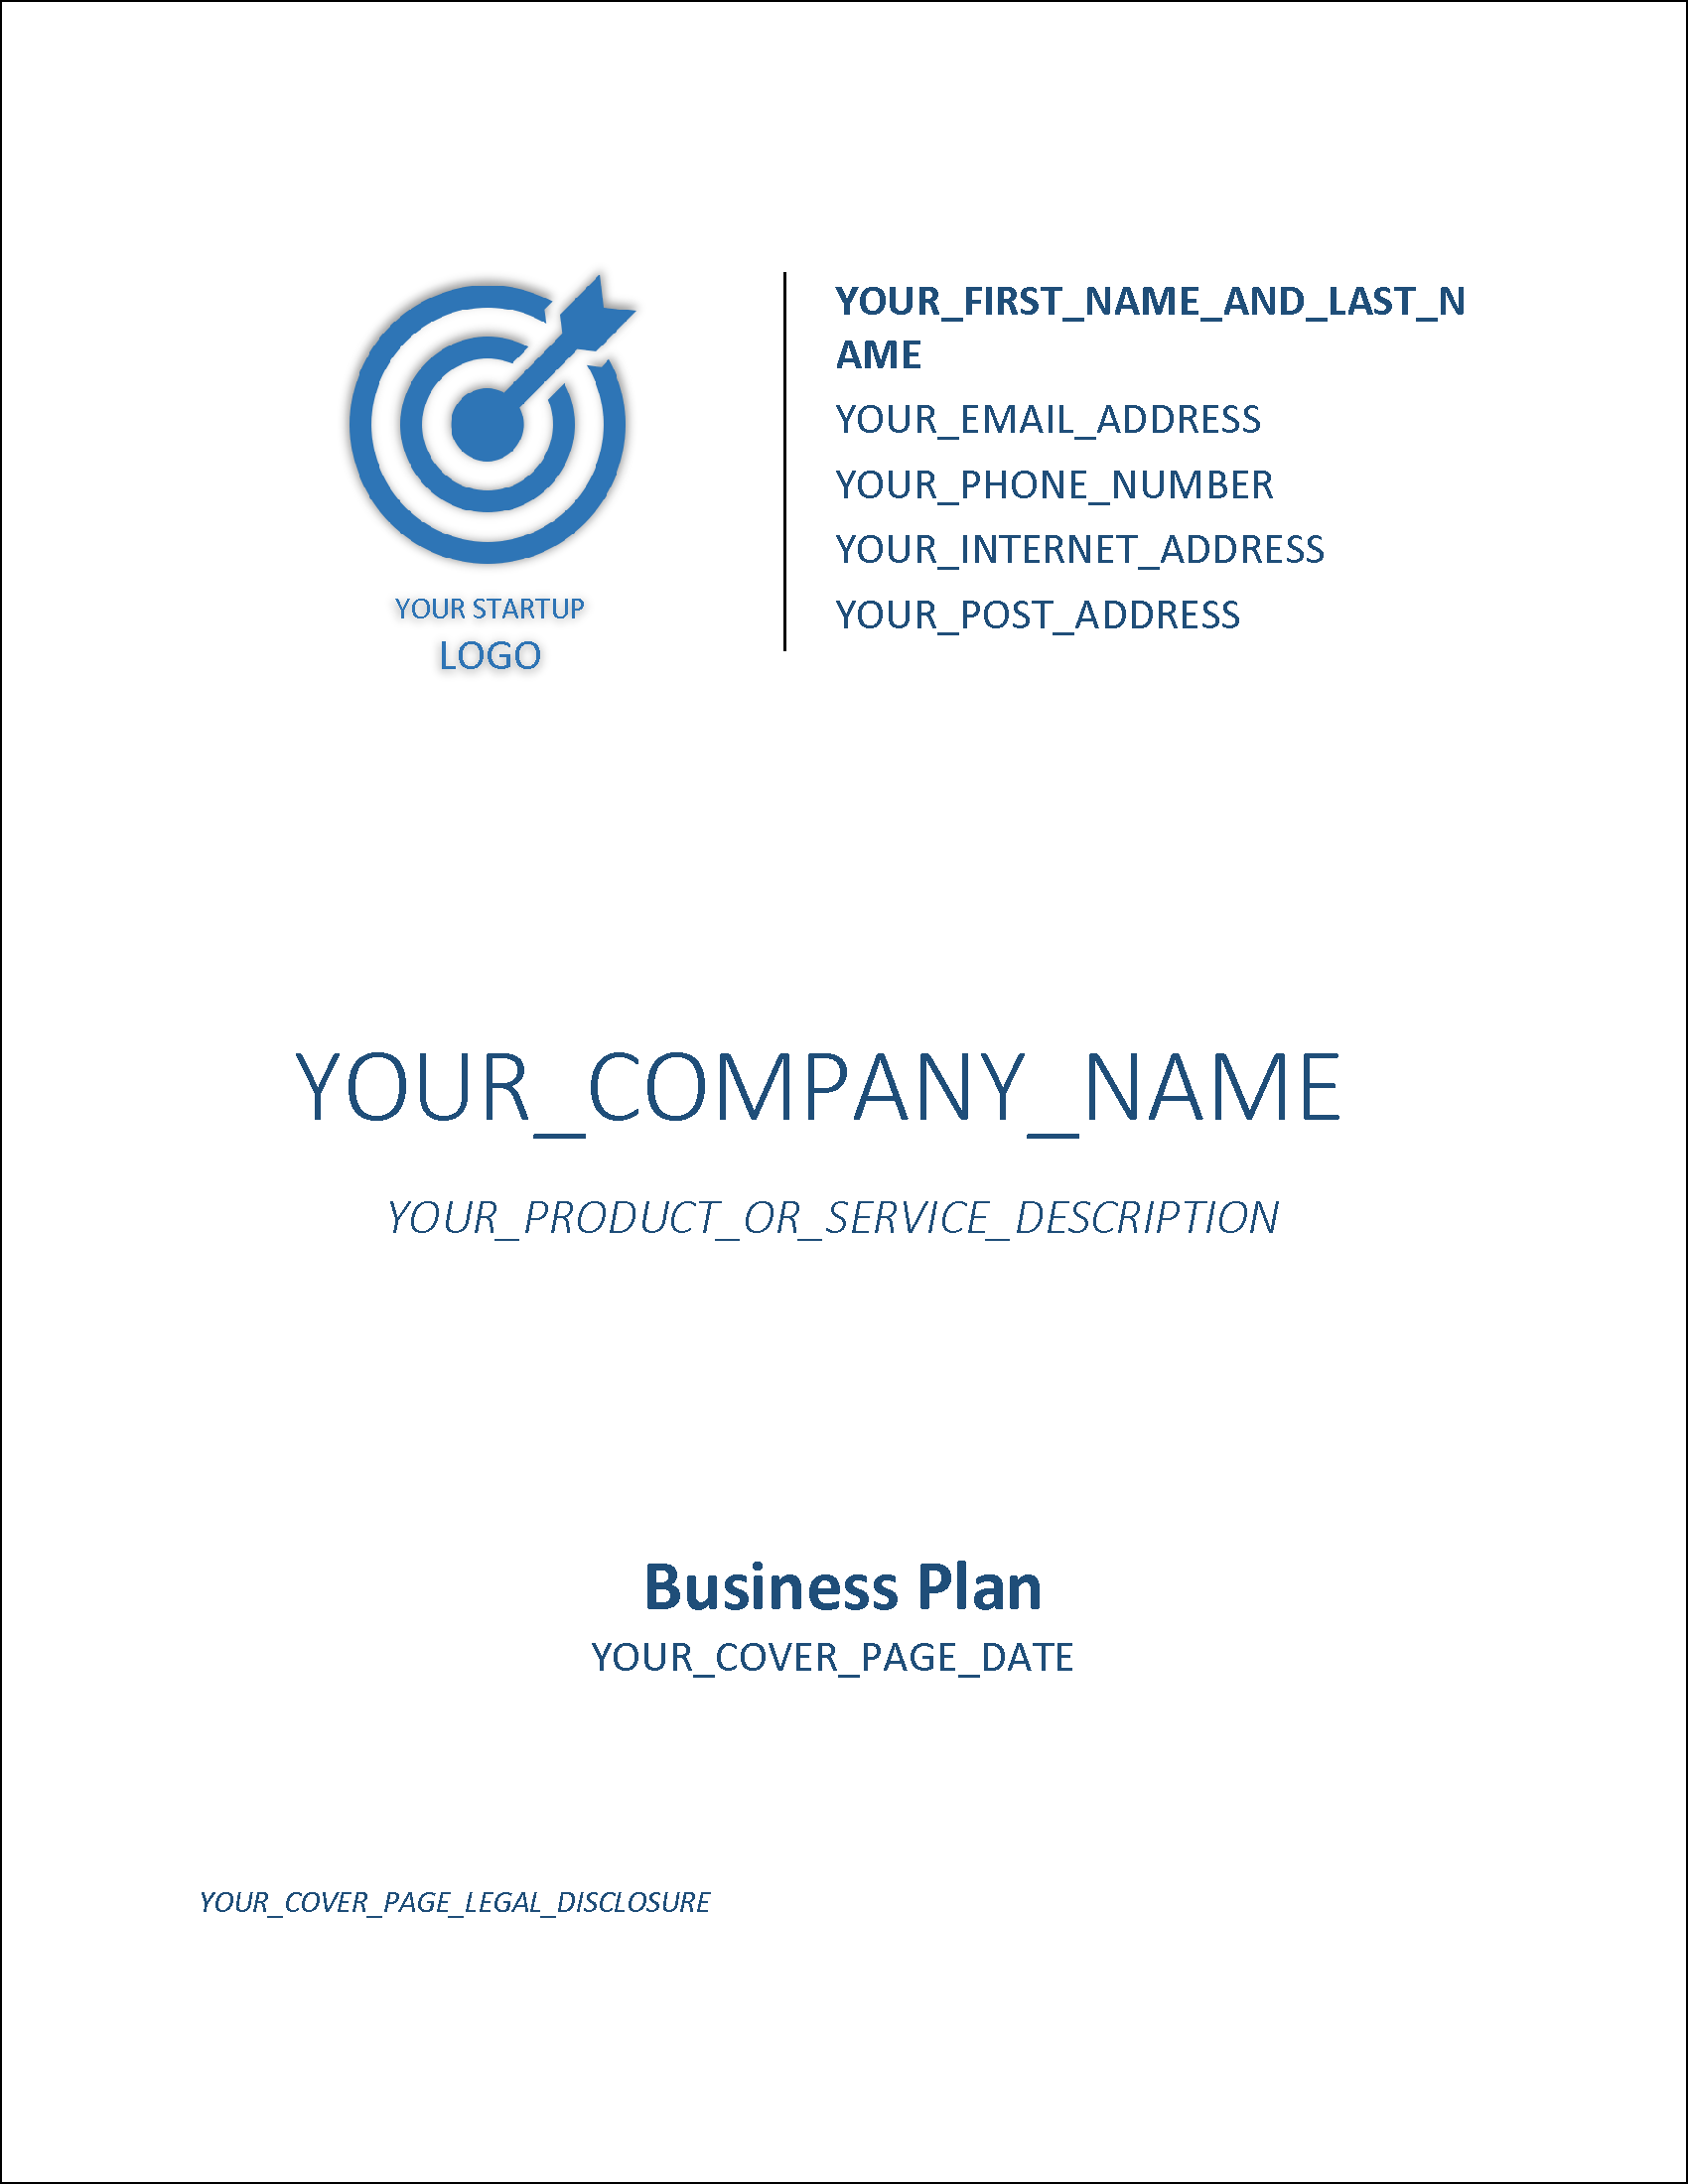 title page of a business plan sample